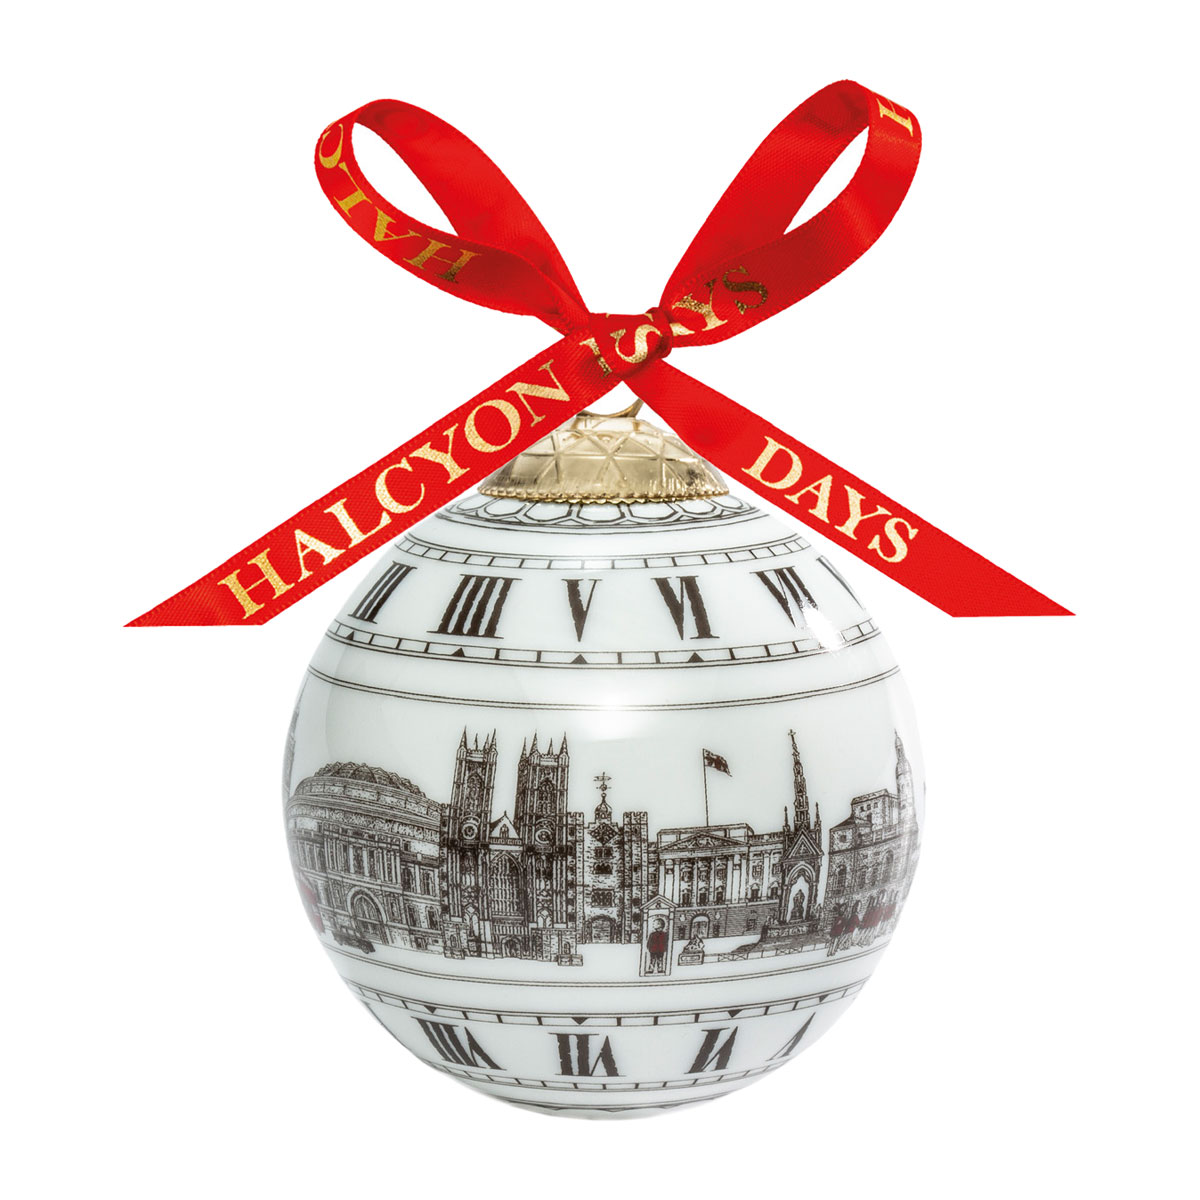 Halcyon Days The London Icons Bauble Ornament